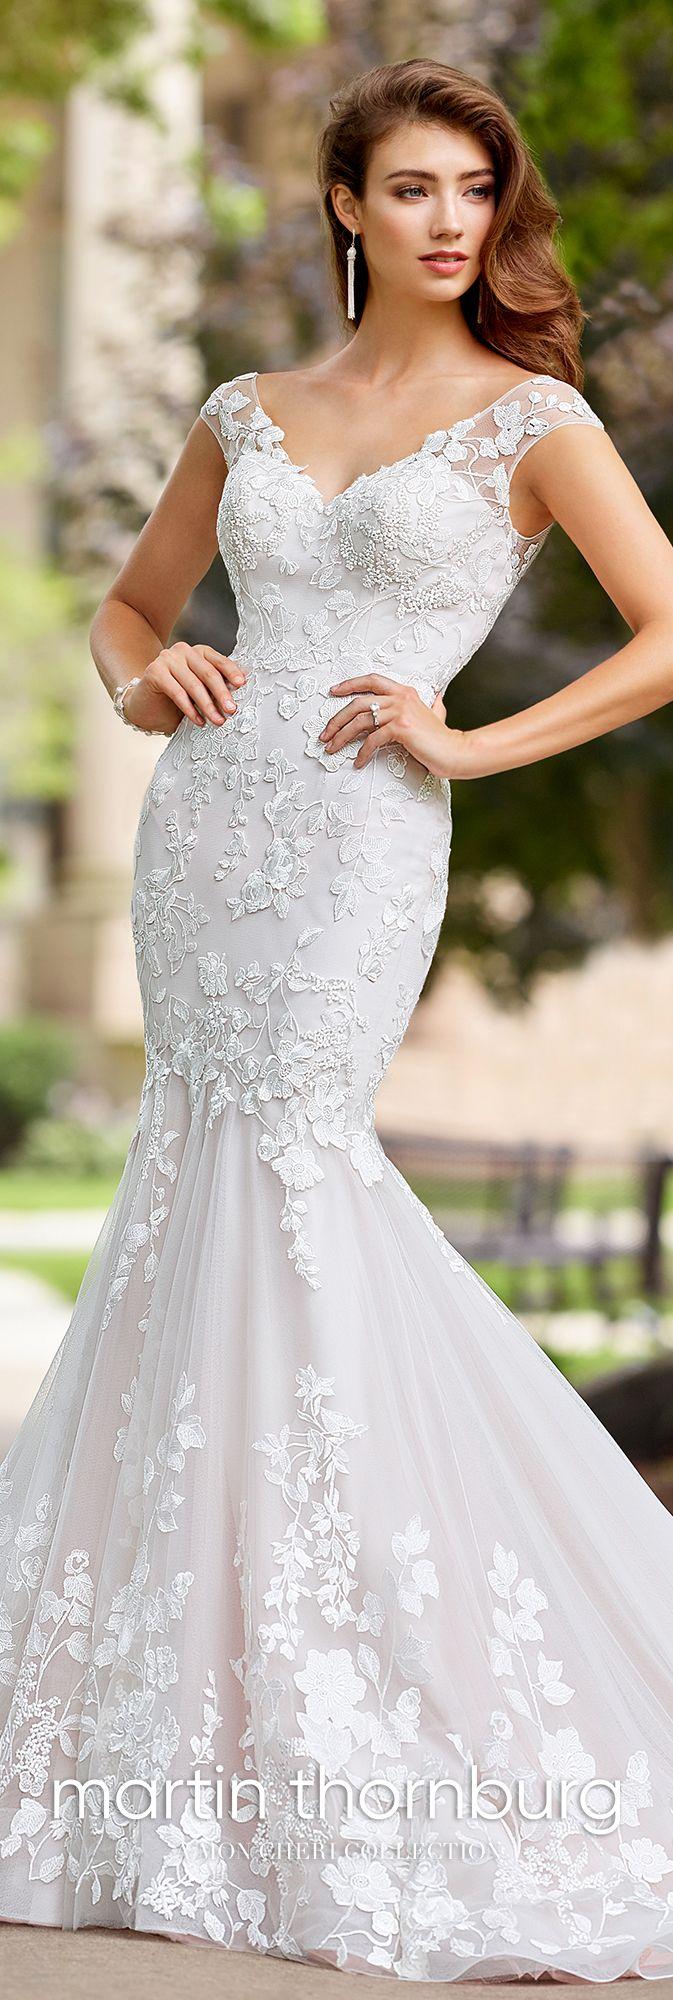 Wedding - Lace & Tulle Trumpet Wedding Dress With A Train- 18276 Serenade